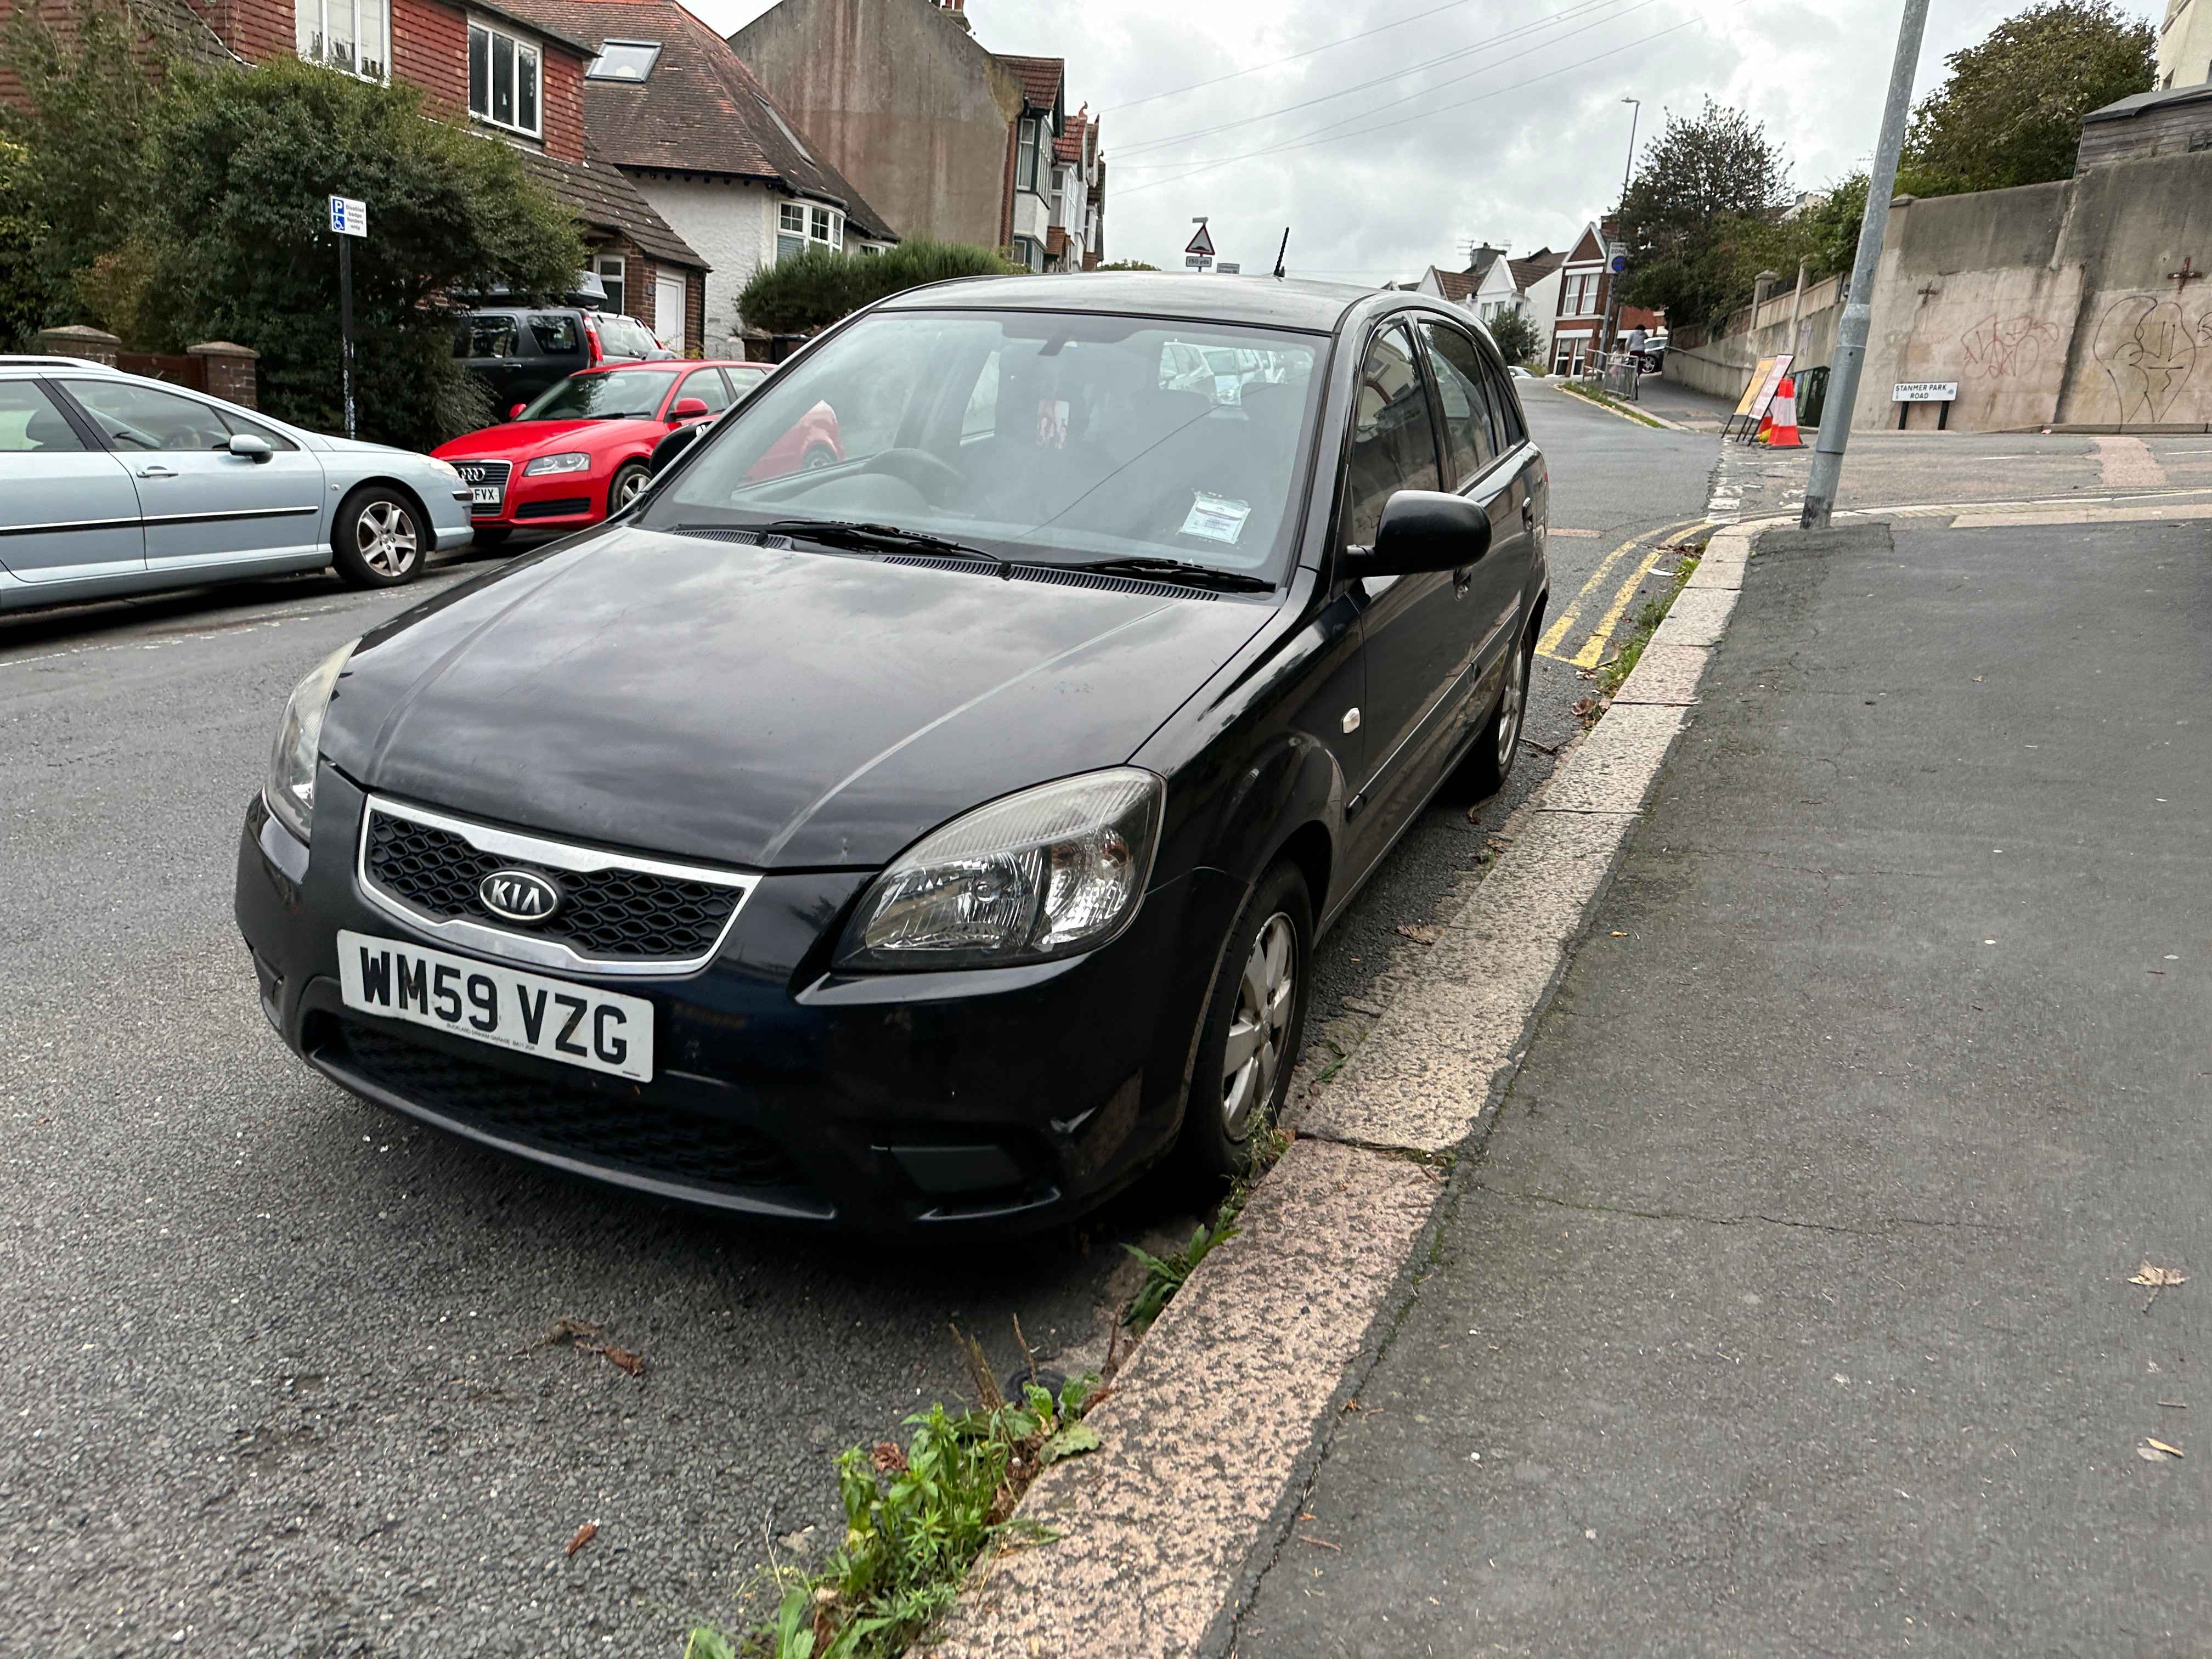 Photograph of WM59 VZG - a Black Kia Rio parked in Hollingdean by a non-resident. The third of four photographs supplied by the residents of Hollingdean.